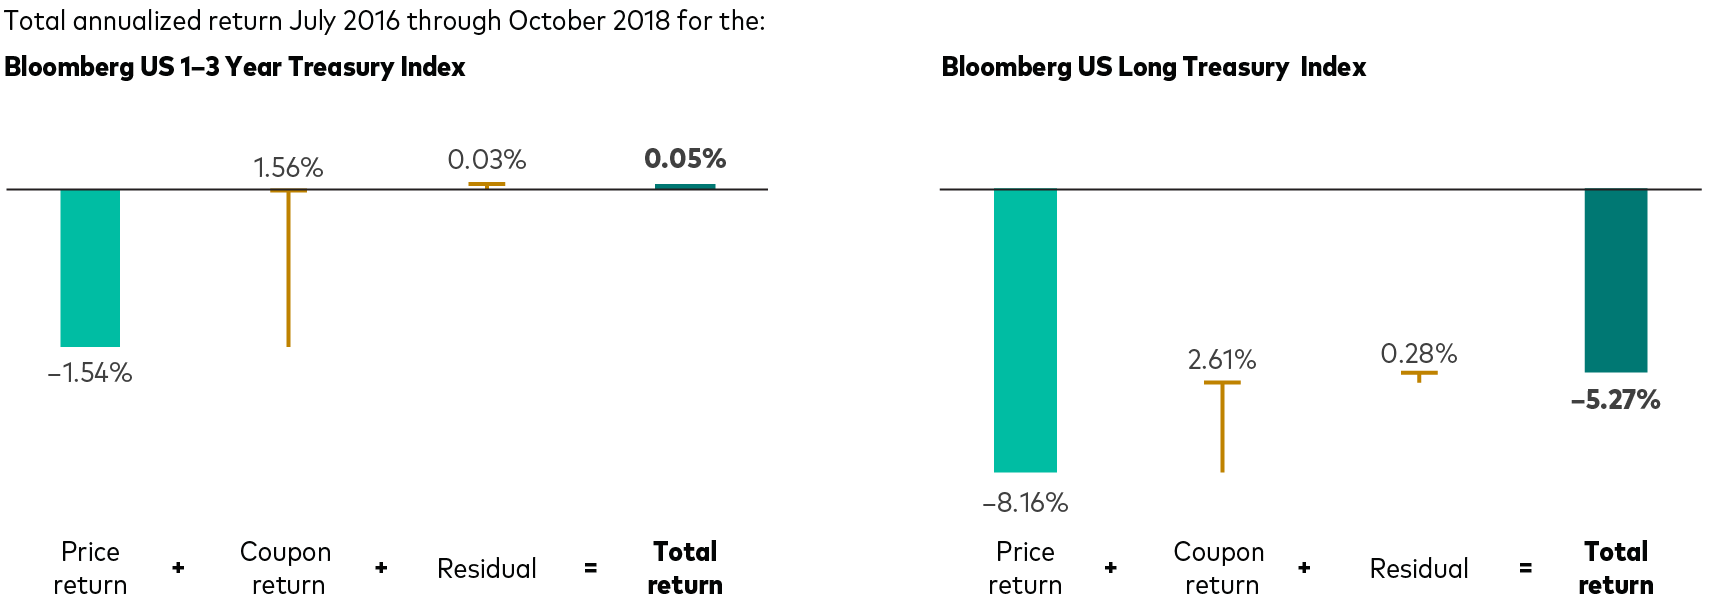 The first panel of the figure shows the total annualized return for the Bloomberg Barclays US 1-3 Year Treasury Index from July 2016 through October 2018 in a bar chart format. The first bar shows a price return of ‒1.54%, the second bar shows a coupon return of 1.56%, and the third bar shows a residual return contribution of 0.03%, which sums up to a total return of 0.05%.    The second panel of the figure shows the total annualized return for the Bloomberg Barclays US Long Treasury Treasury Index for the same period in a bar chart format. The first bar shows a price return of ‒8.16%, the second bar shows a coupon return of 2.61%, and the third bar shows a residual return contribution of 0.28%. which sums up to a total return of ‒5.27%.  